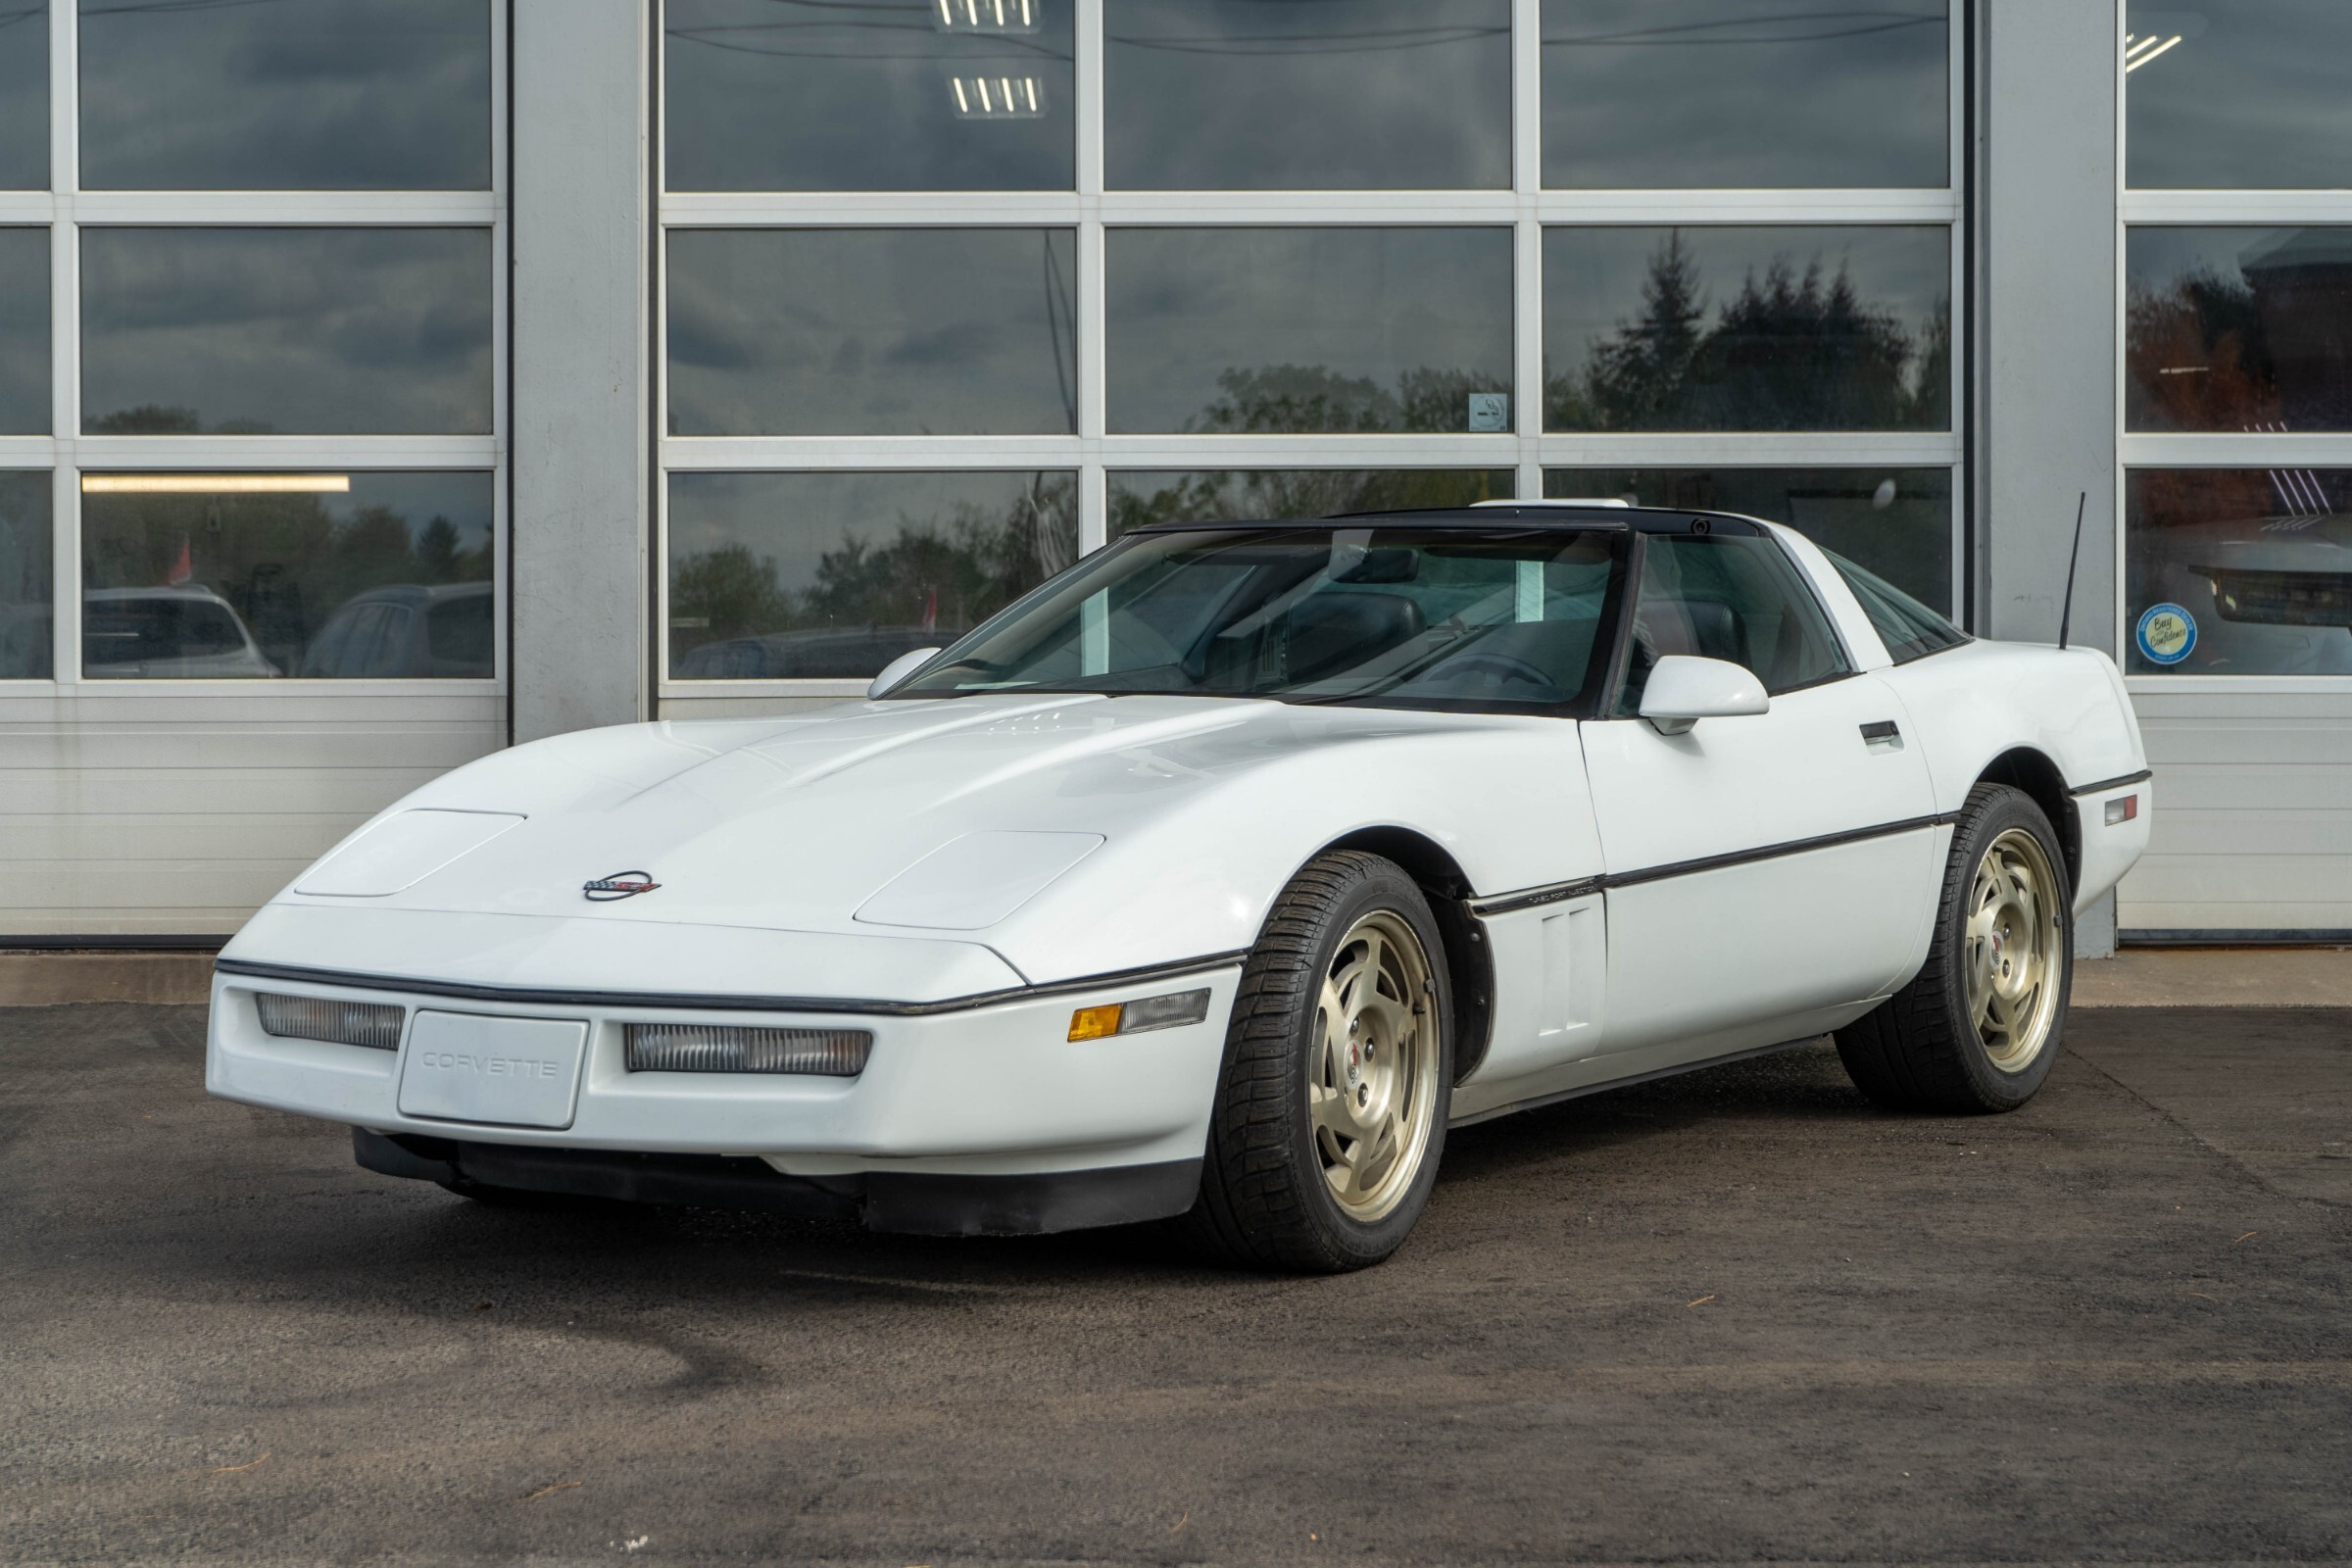 1990 Chevrolet Corvette Base| Local Trade In| No Accidents| US History|